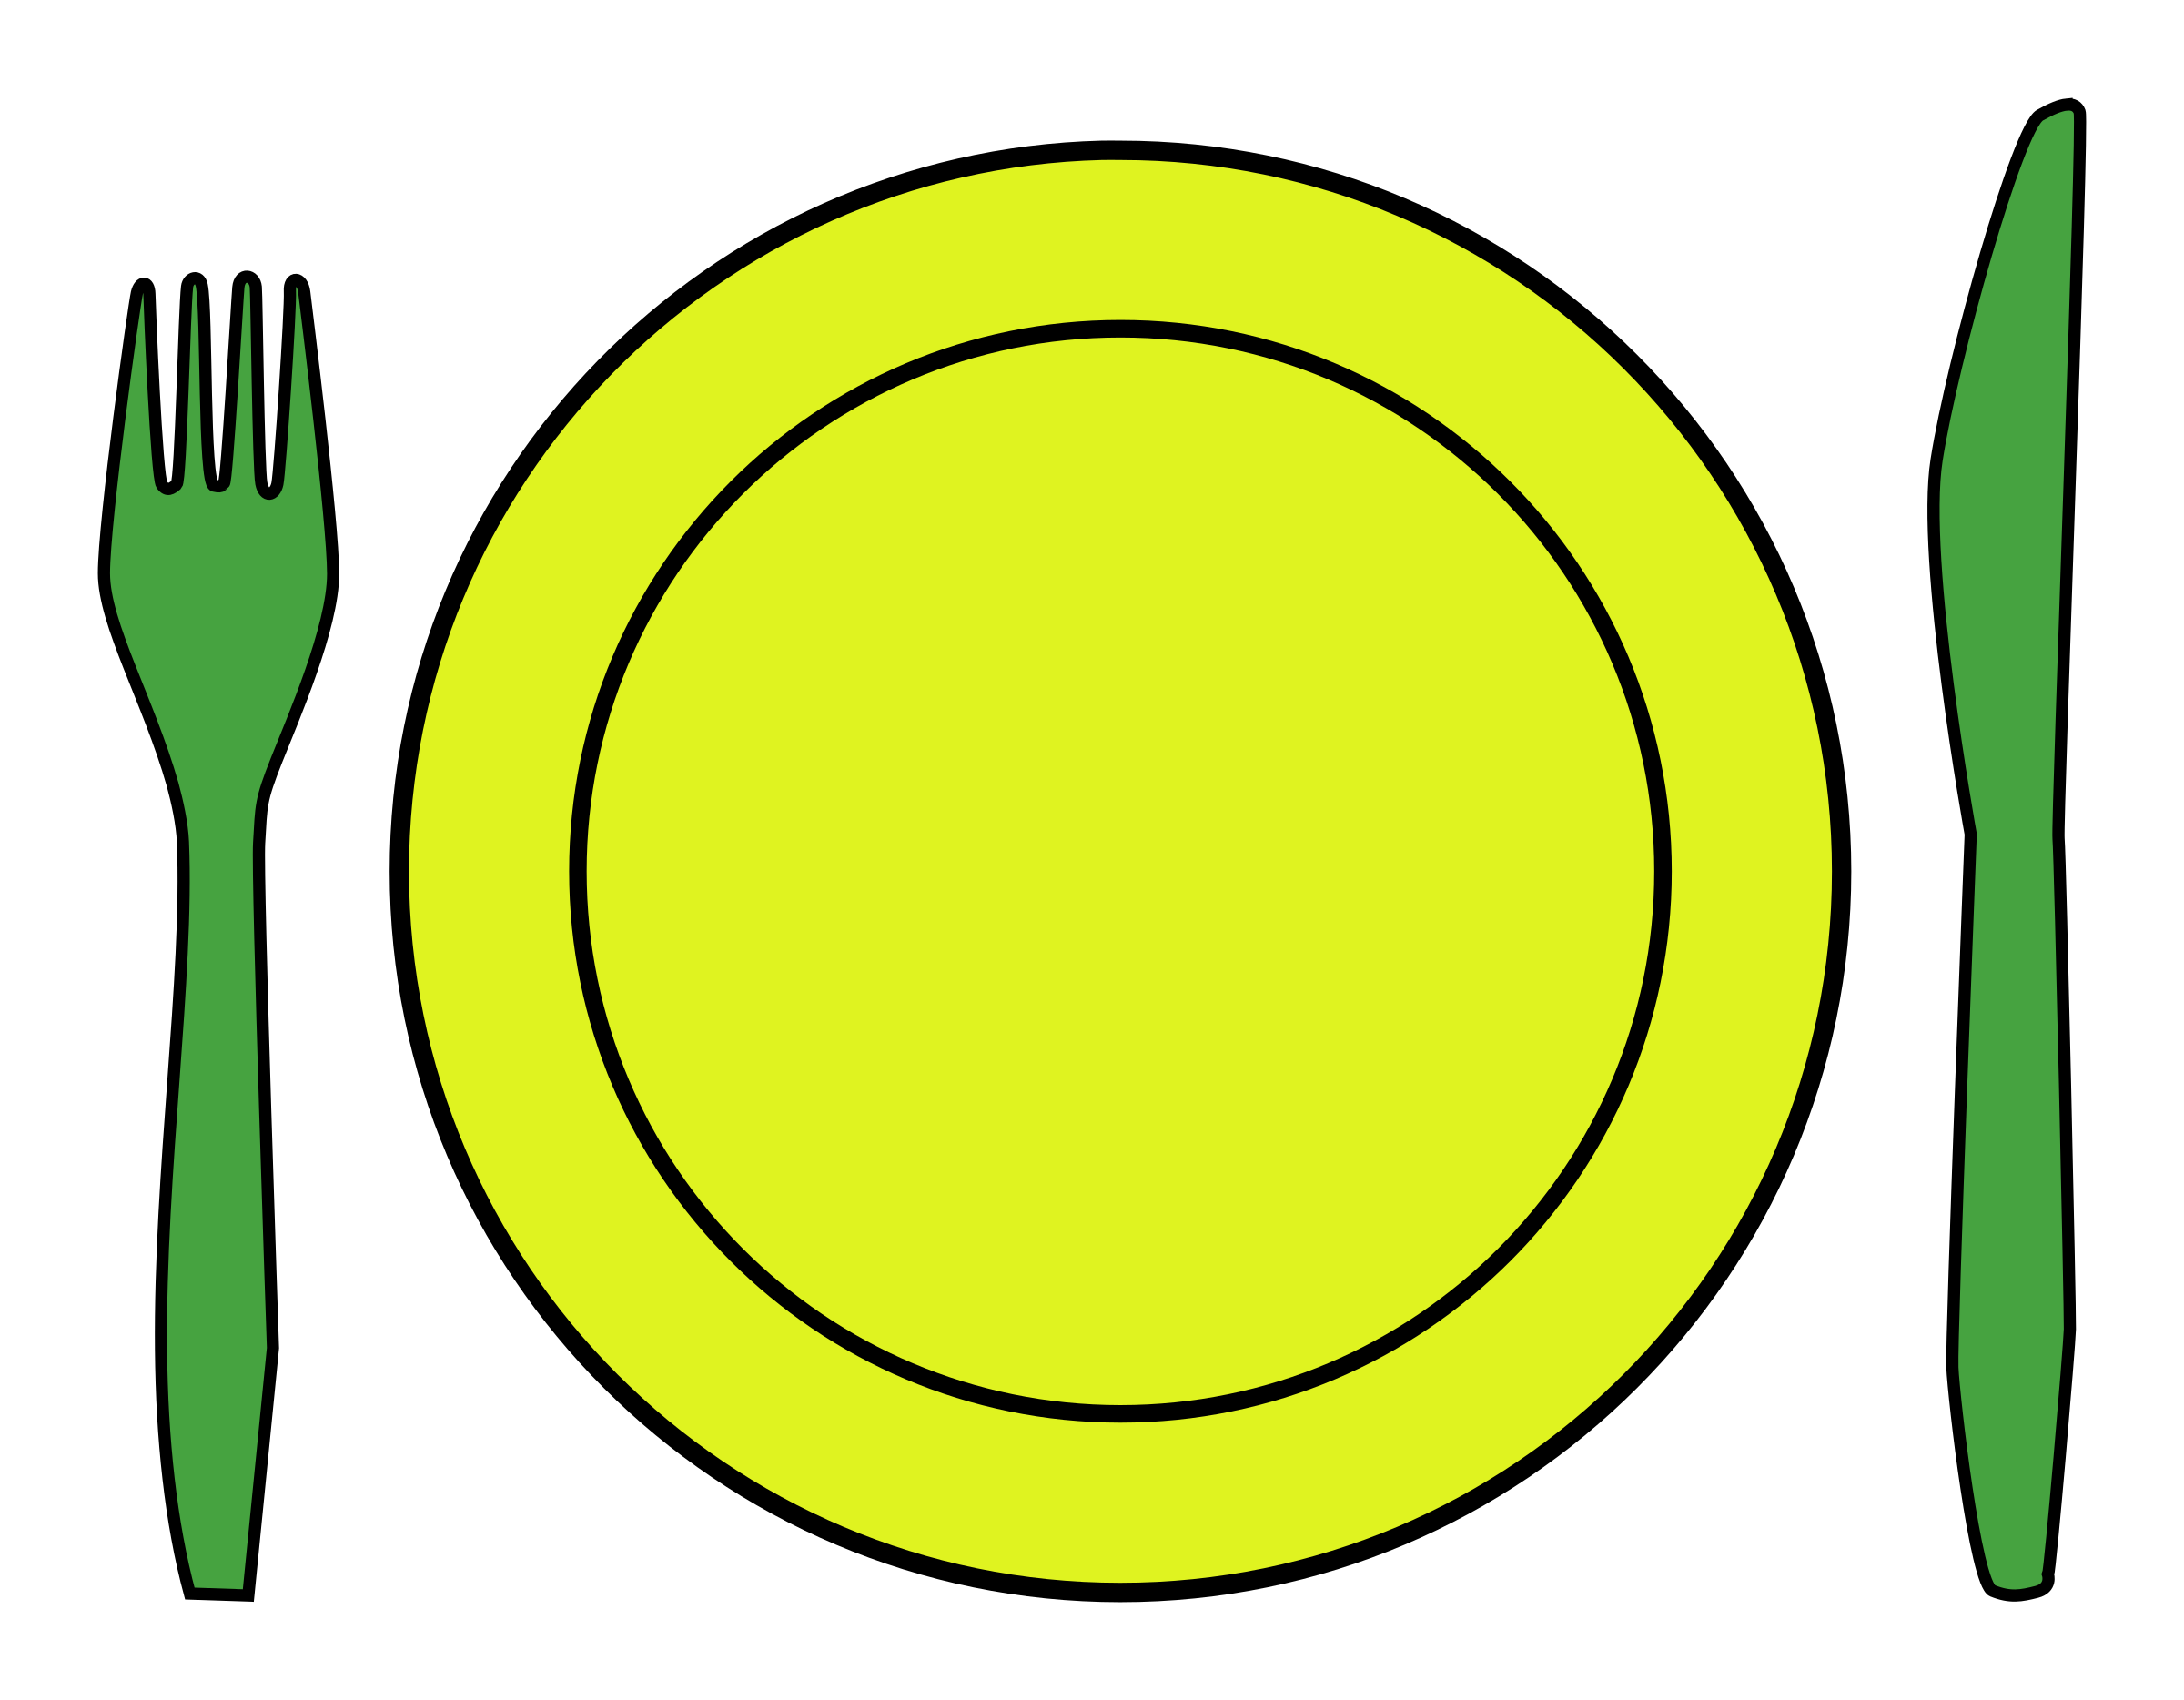 Dinner Place Setting Clipart